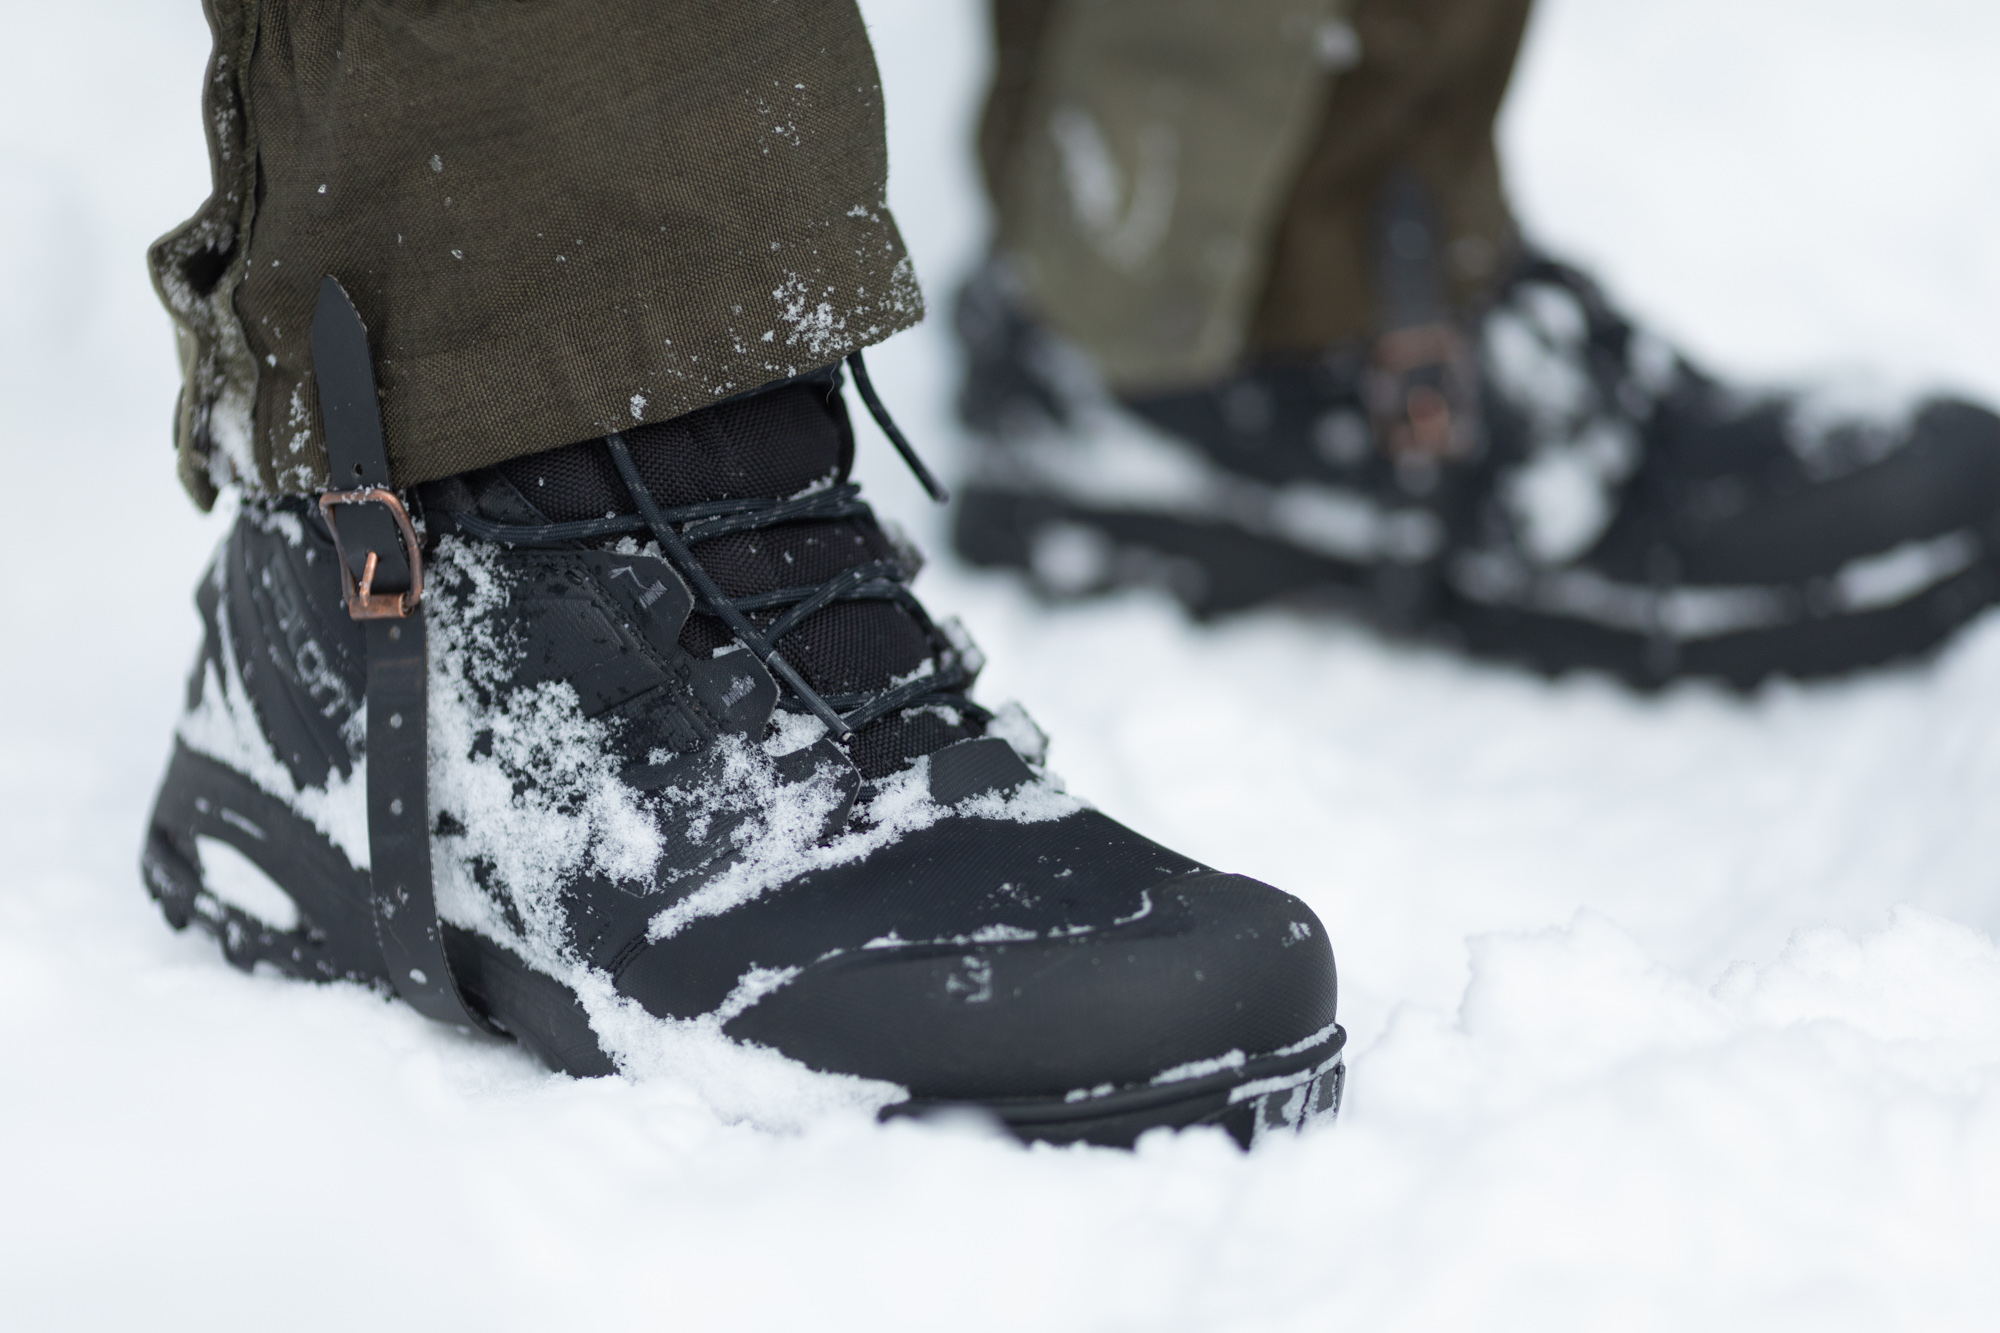 Salomon Toundra Forces together with Austiran gaiters in snow 